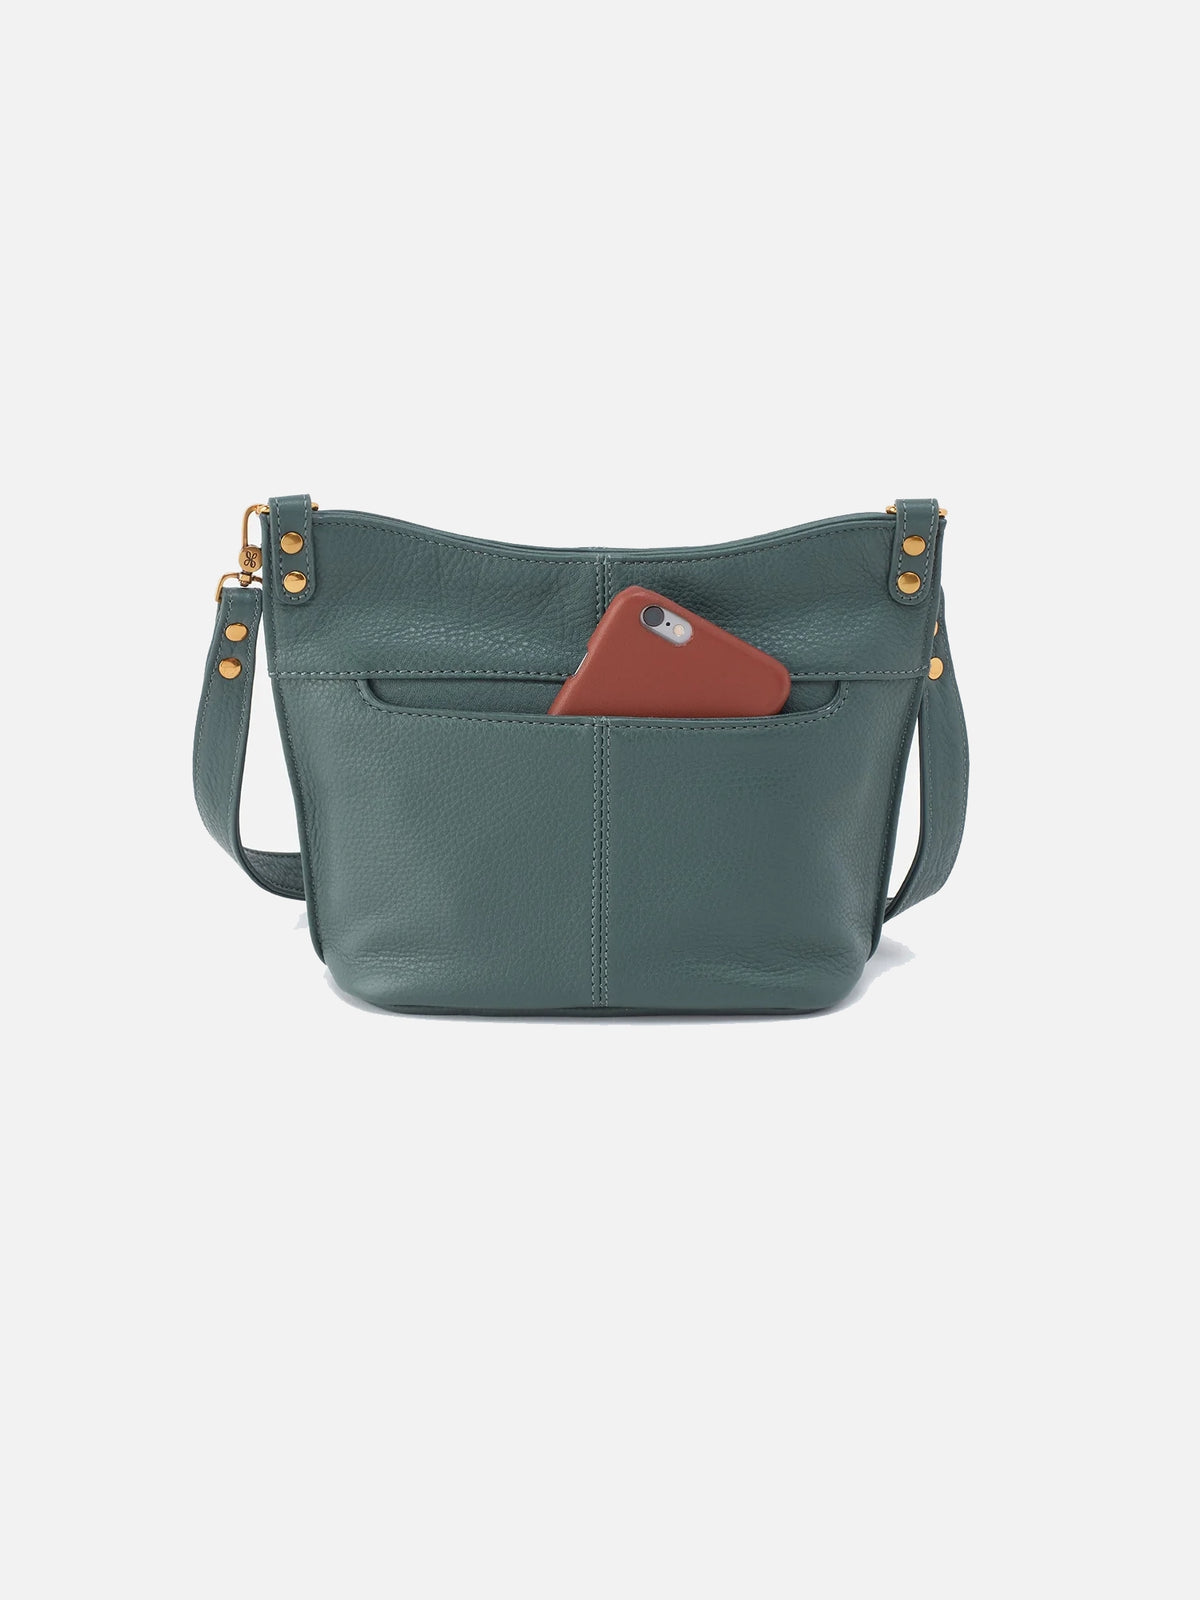 hobo pier small crossbody bag in sage leaf green pebbled leather